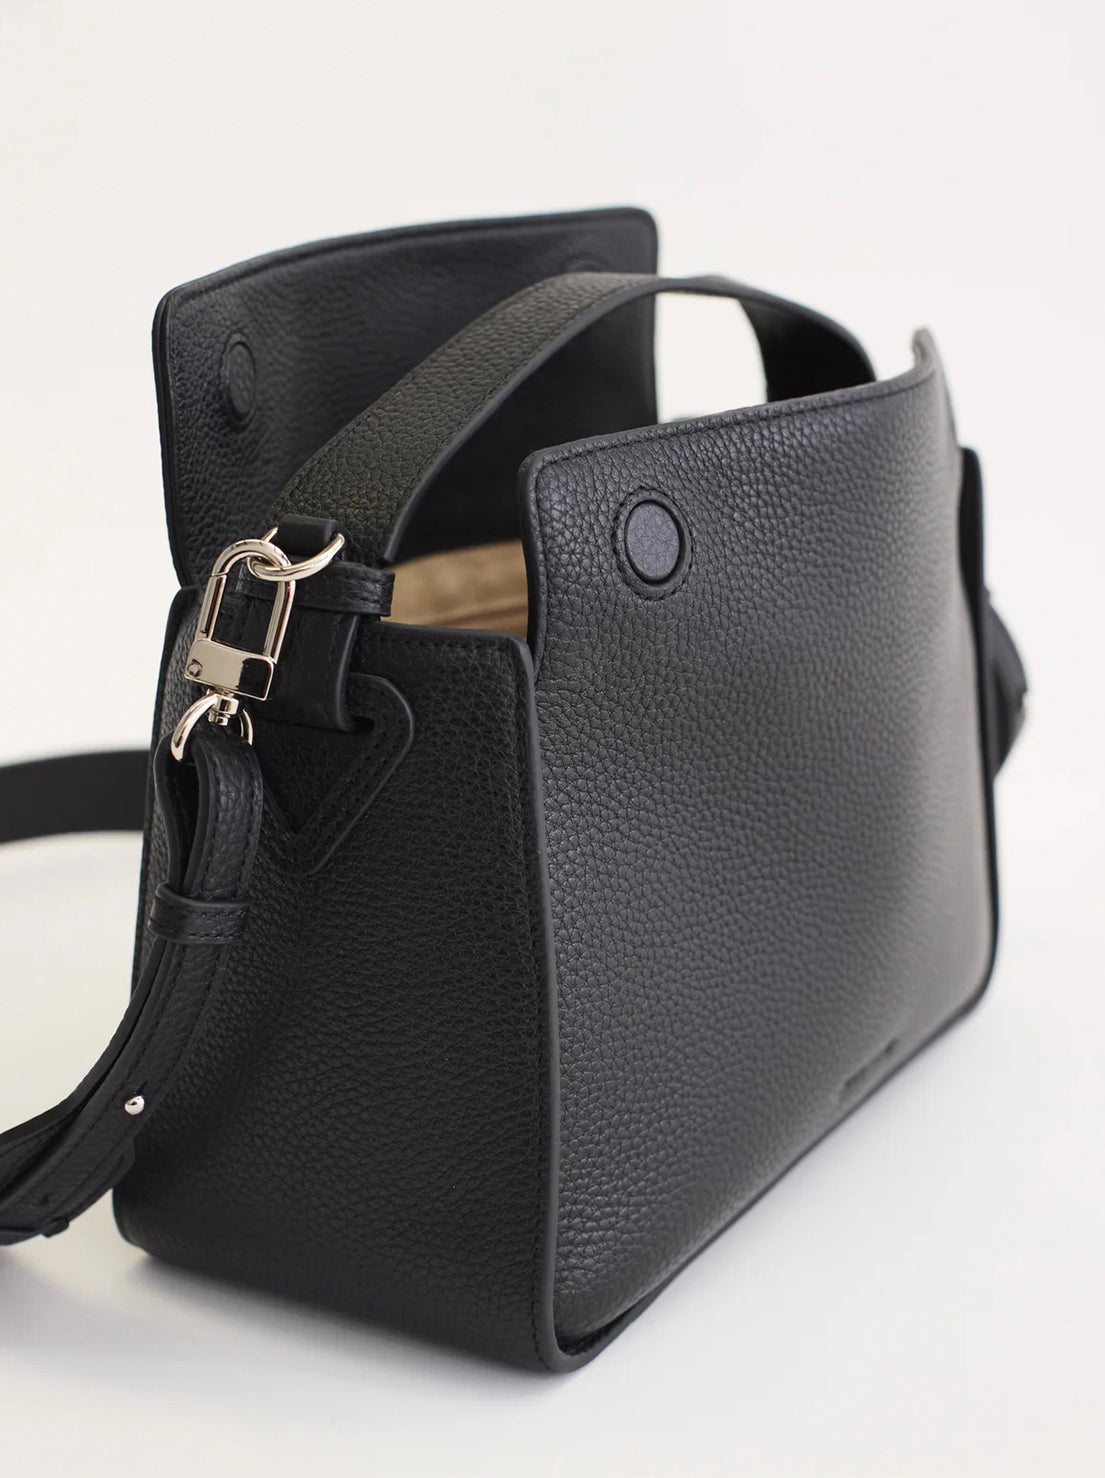 The Horse - Clementine Bag - Black